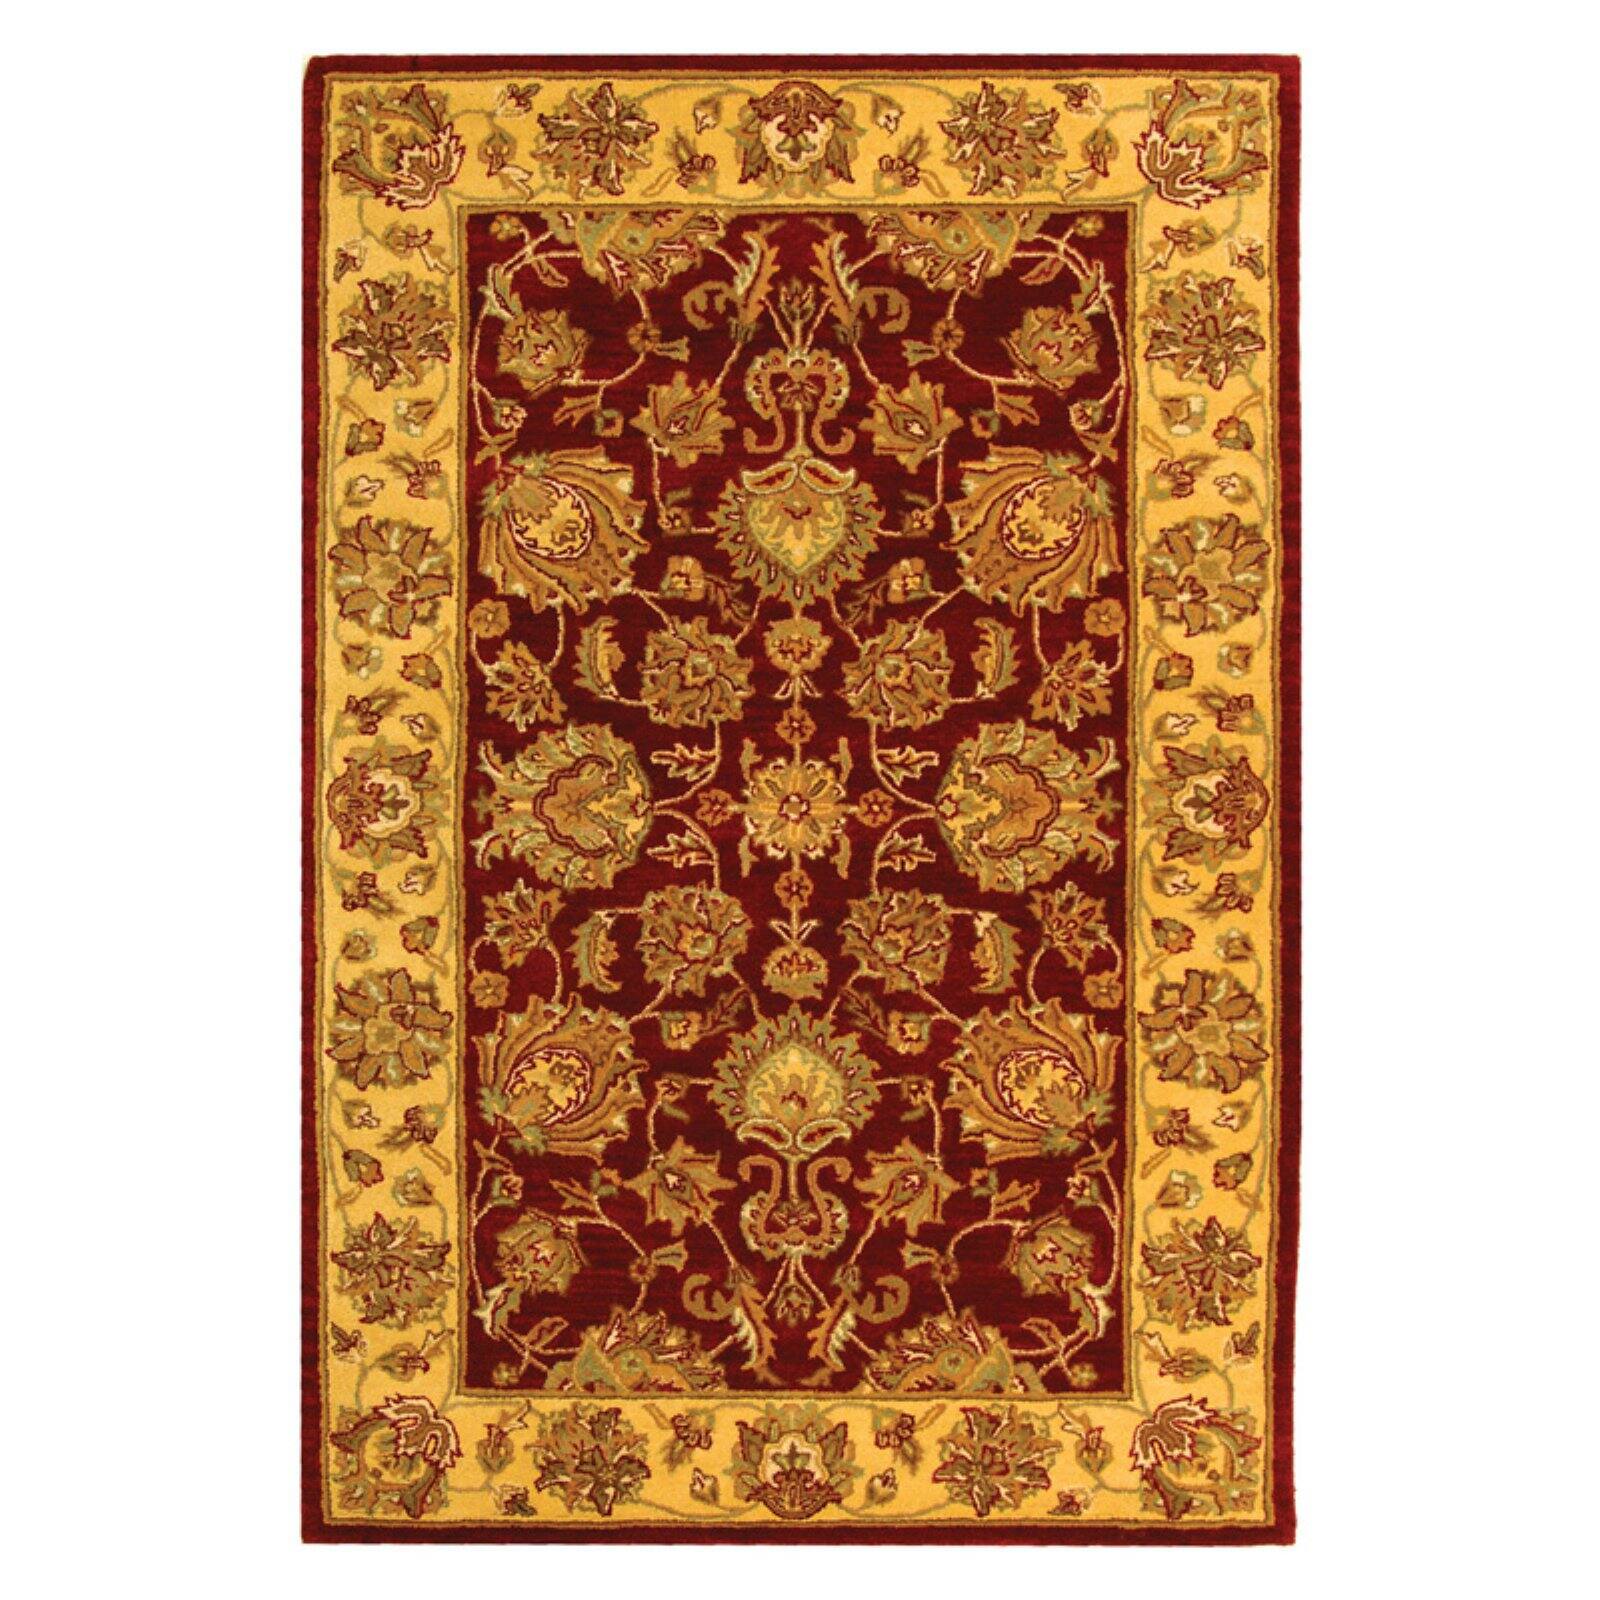 SAFAVIEH Heritage Regis Traditional Wool Area Rug, Red/Gold, 4'6" x 6'6" Oval - image 4 of 9